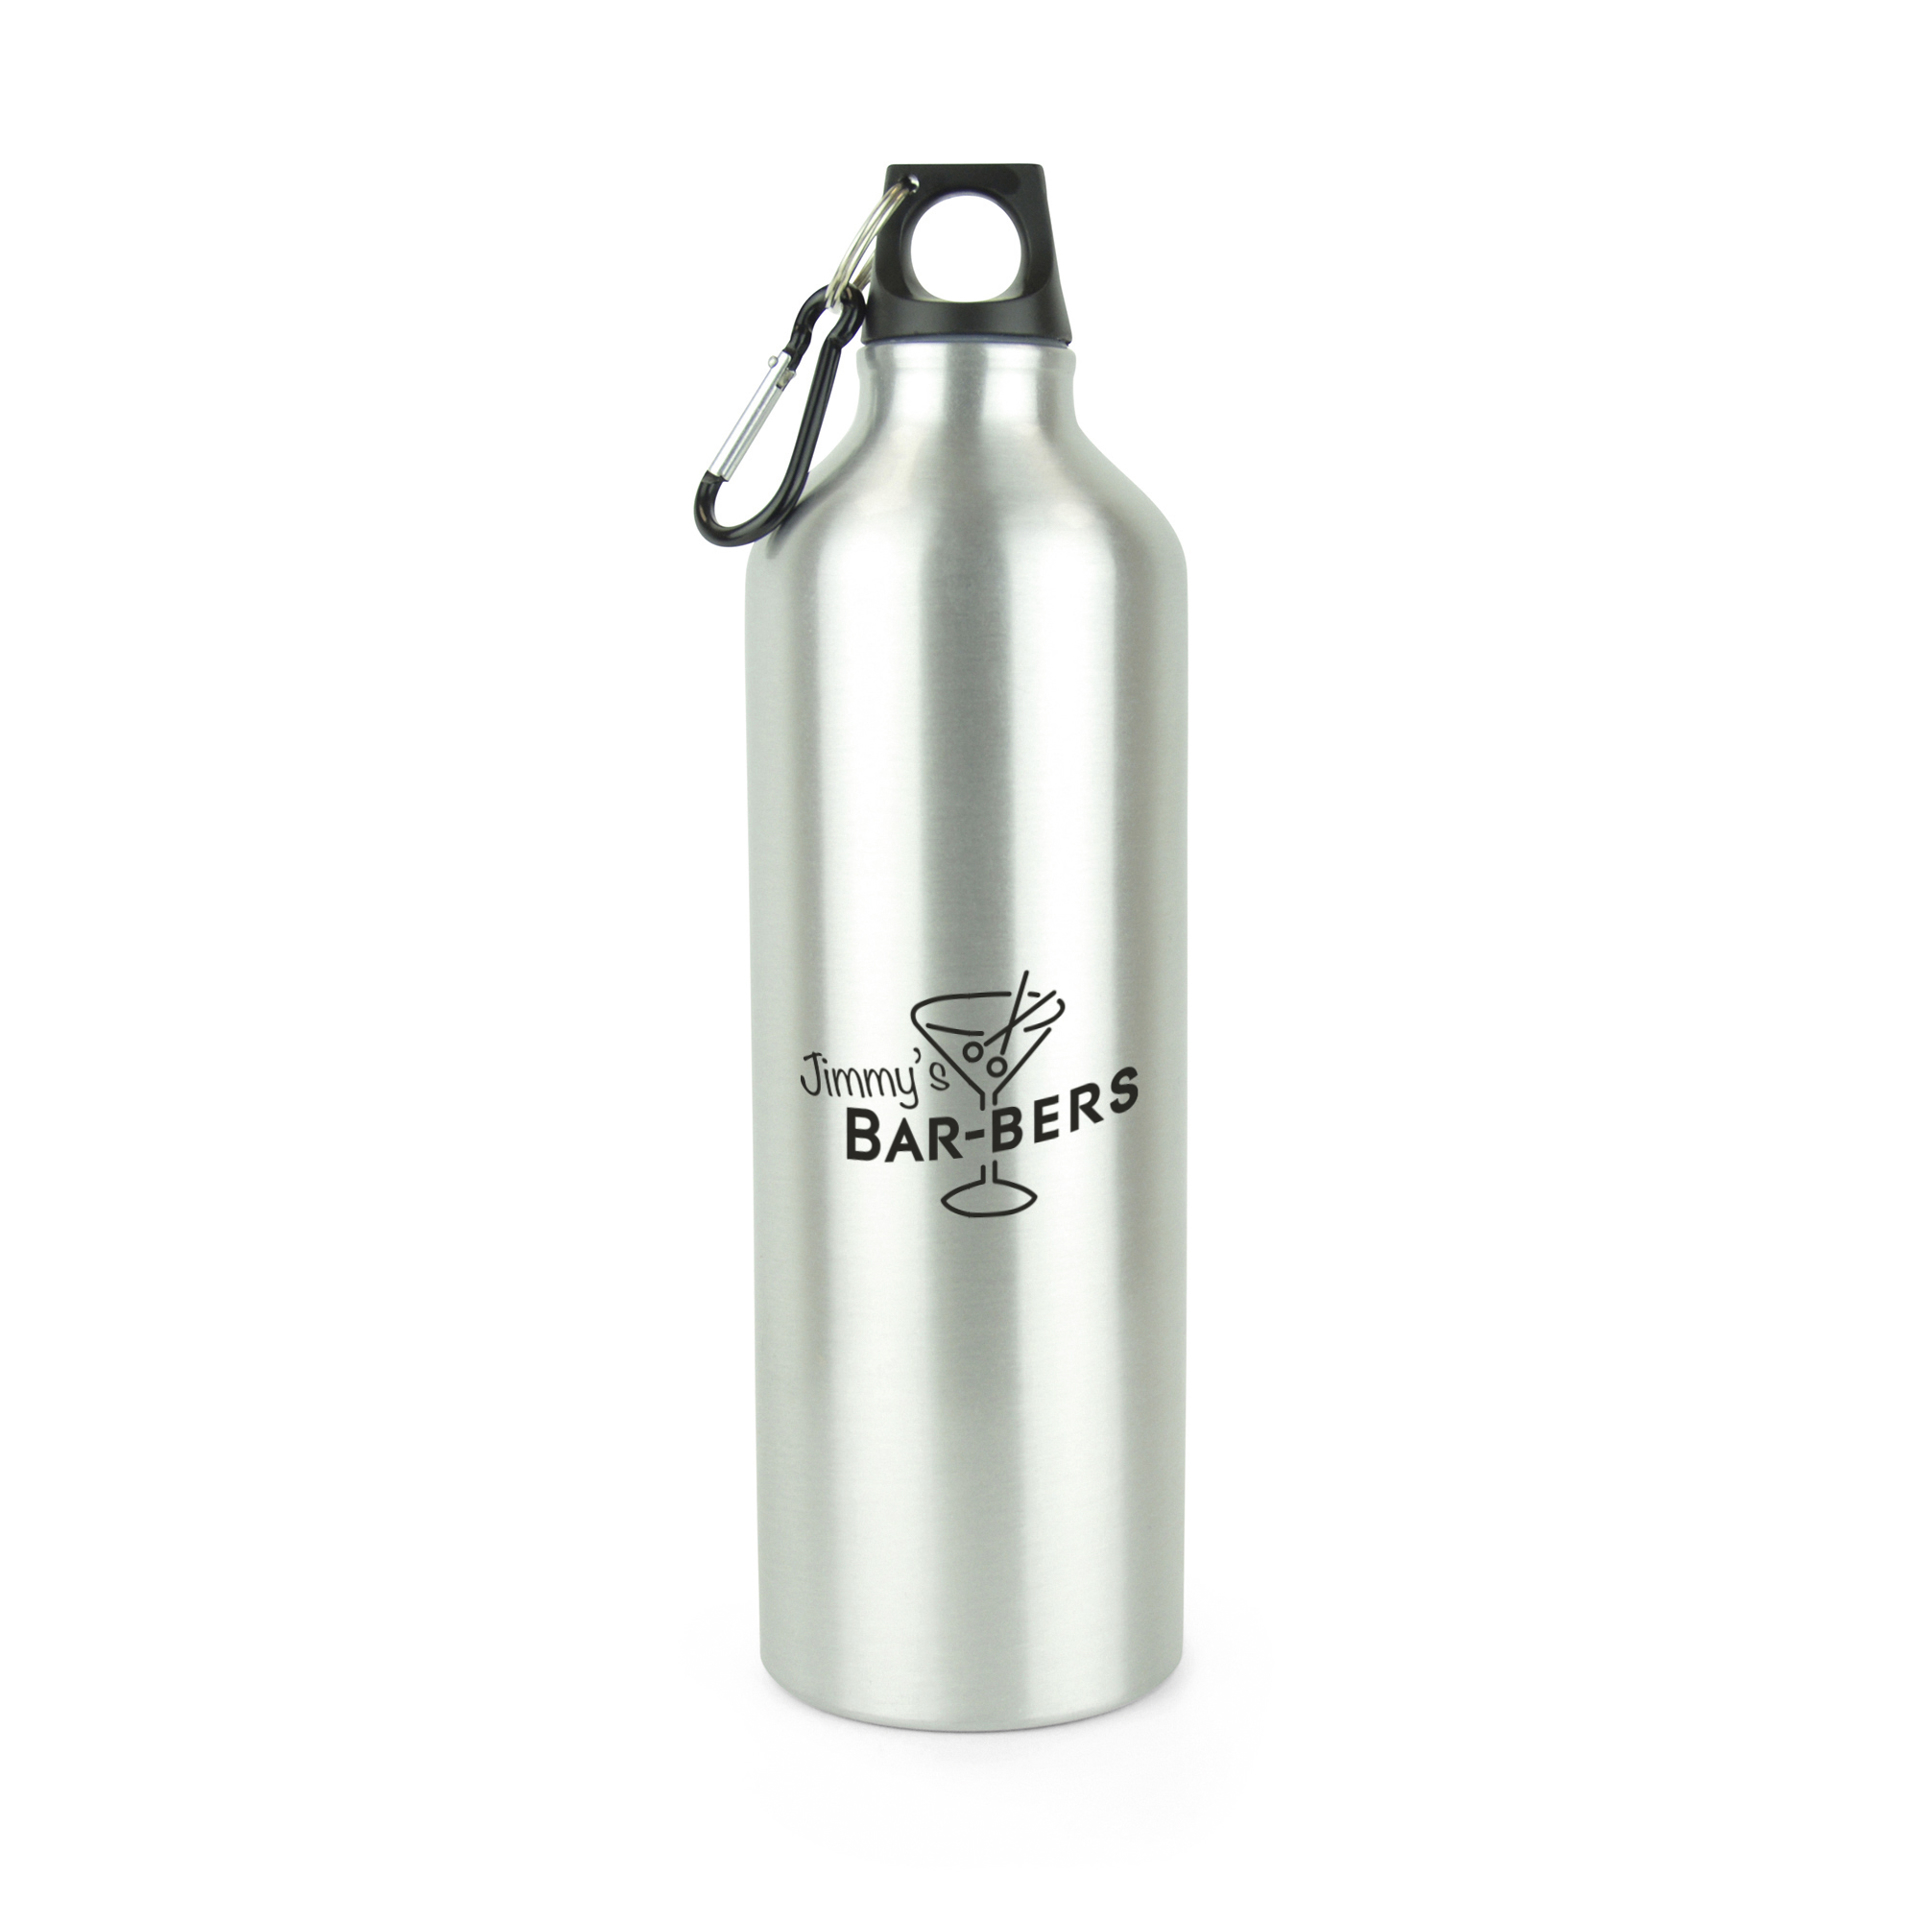 Herring - 750ml Aluminium Bottle in silver with black lid and 1 colour print